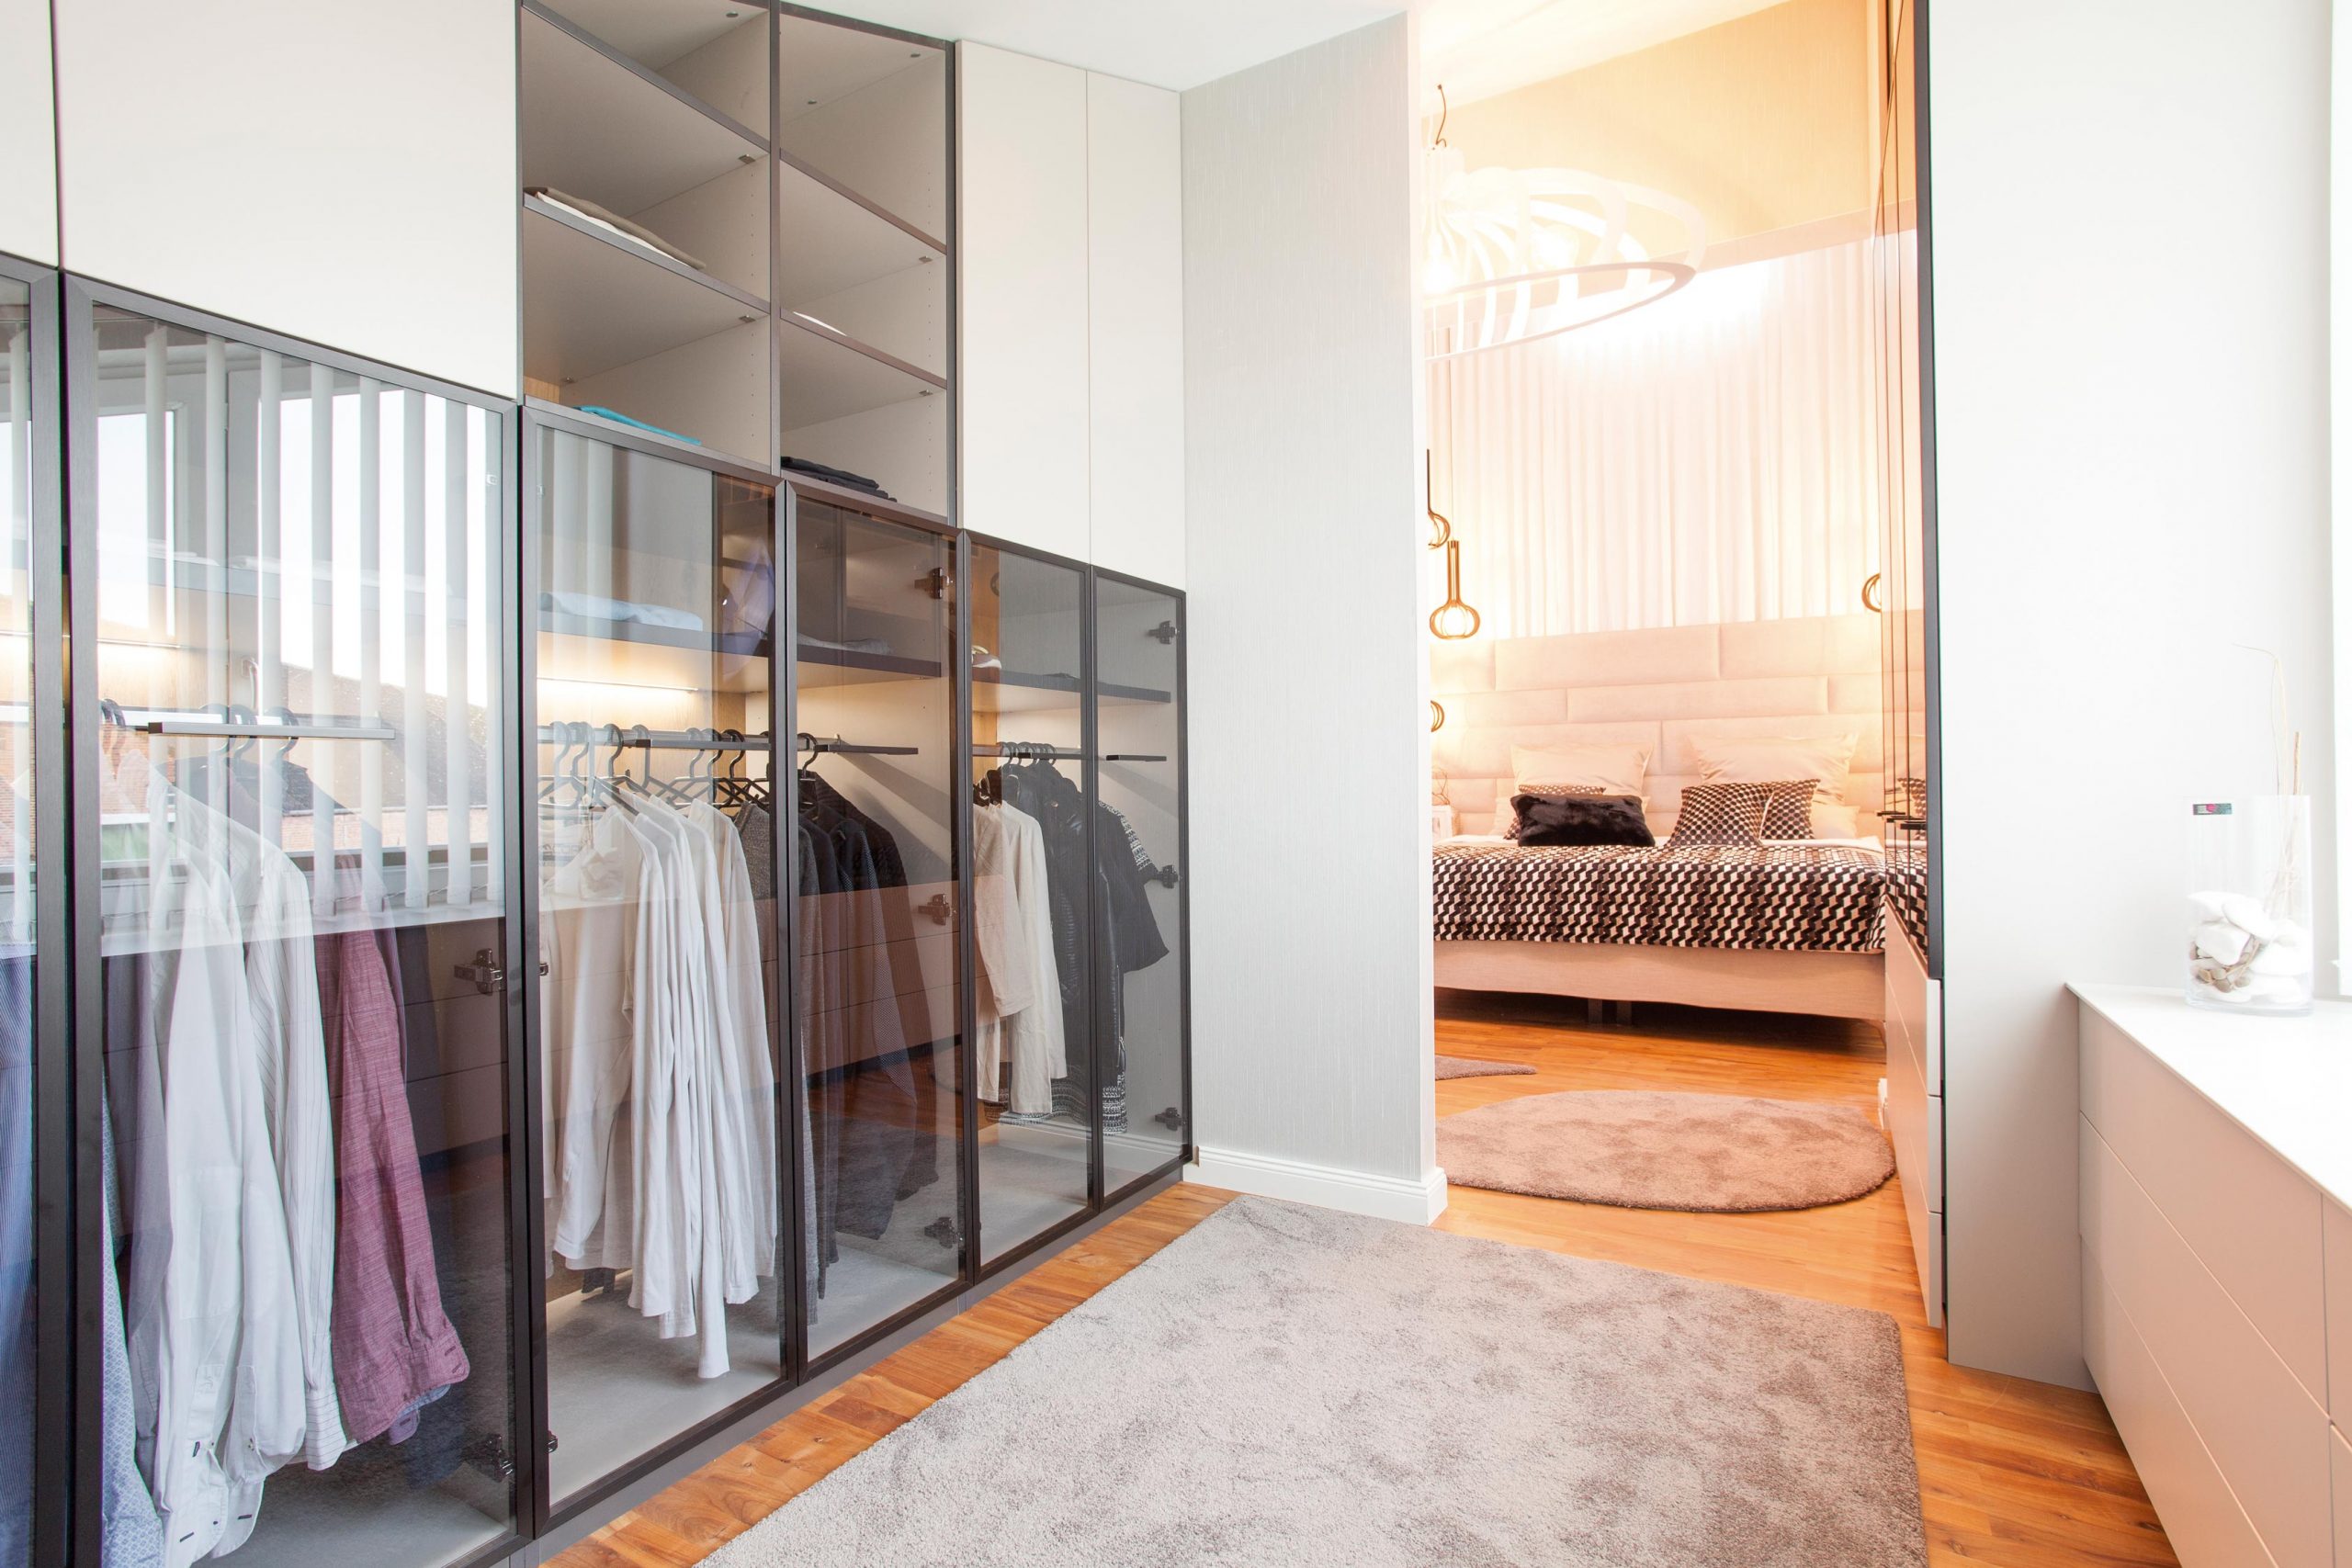 Walk-in wardrobe with functions